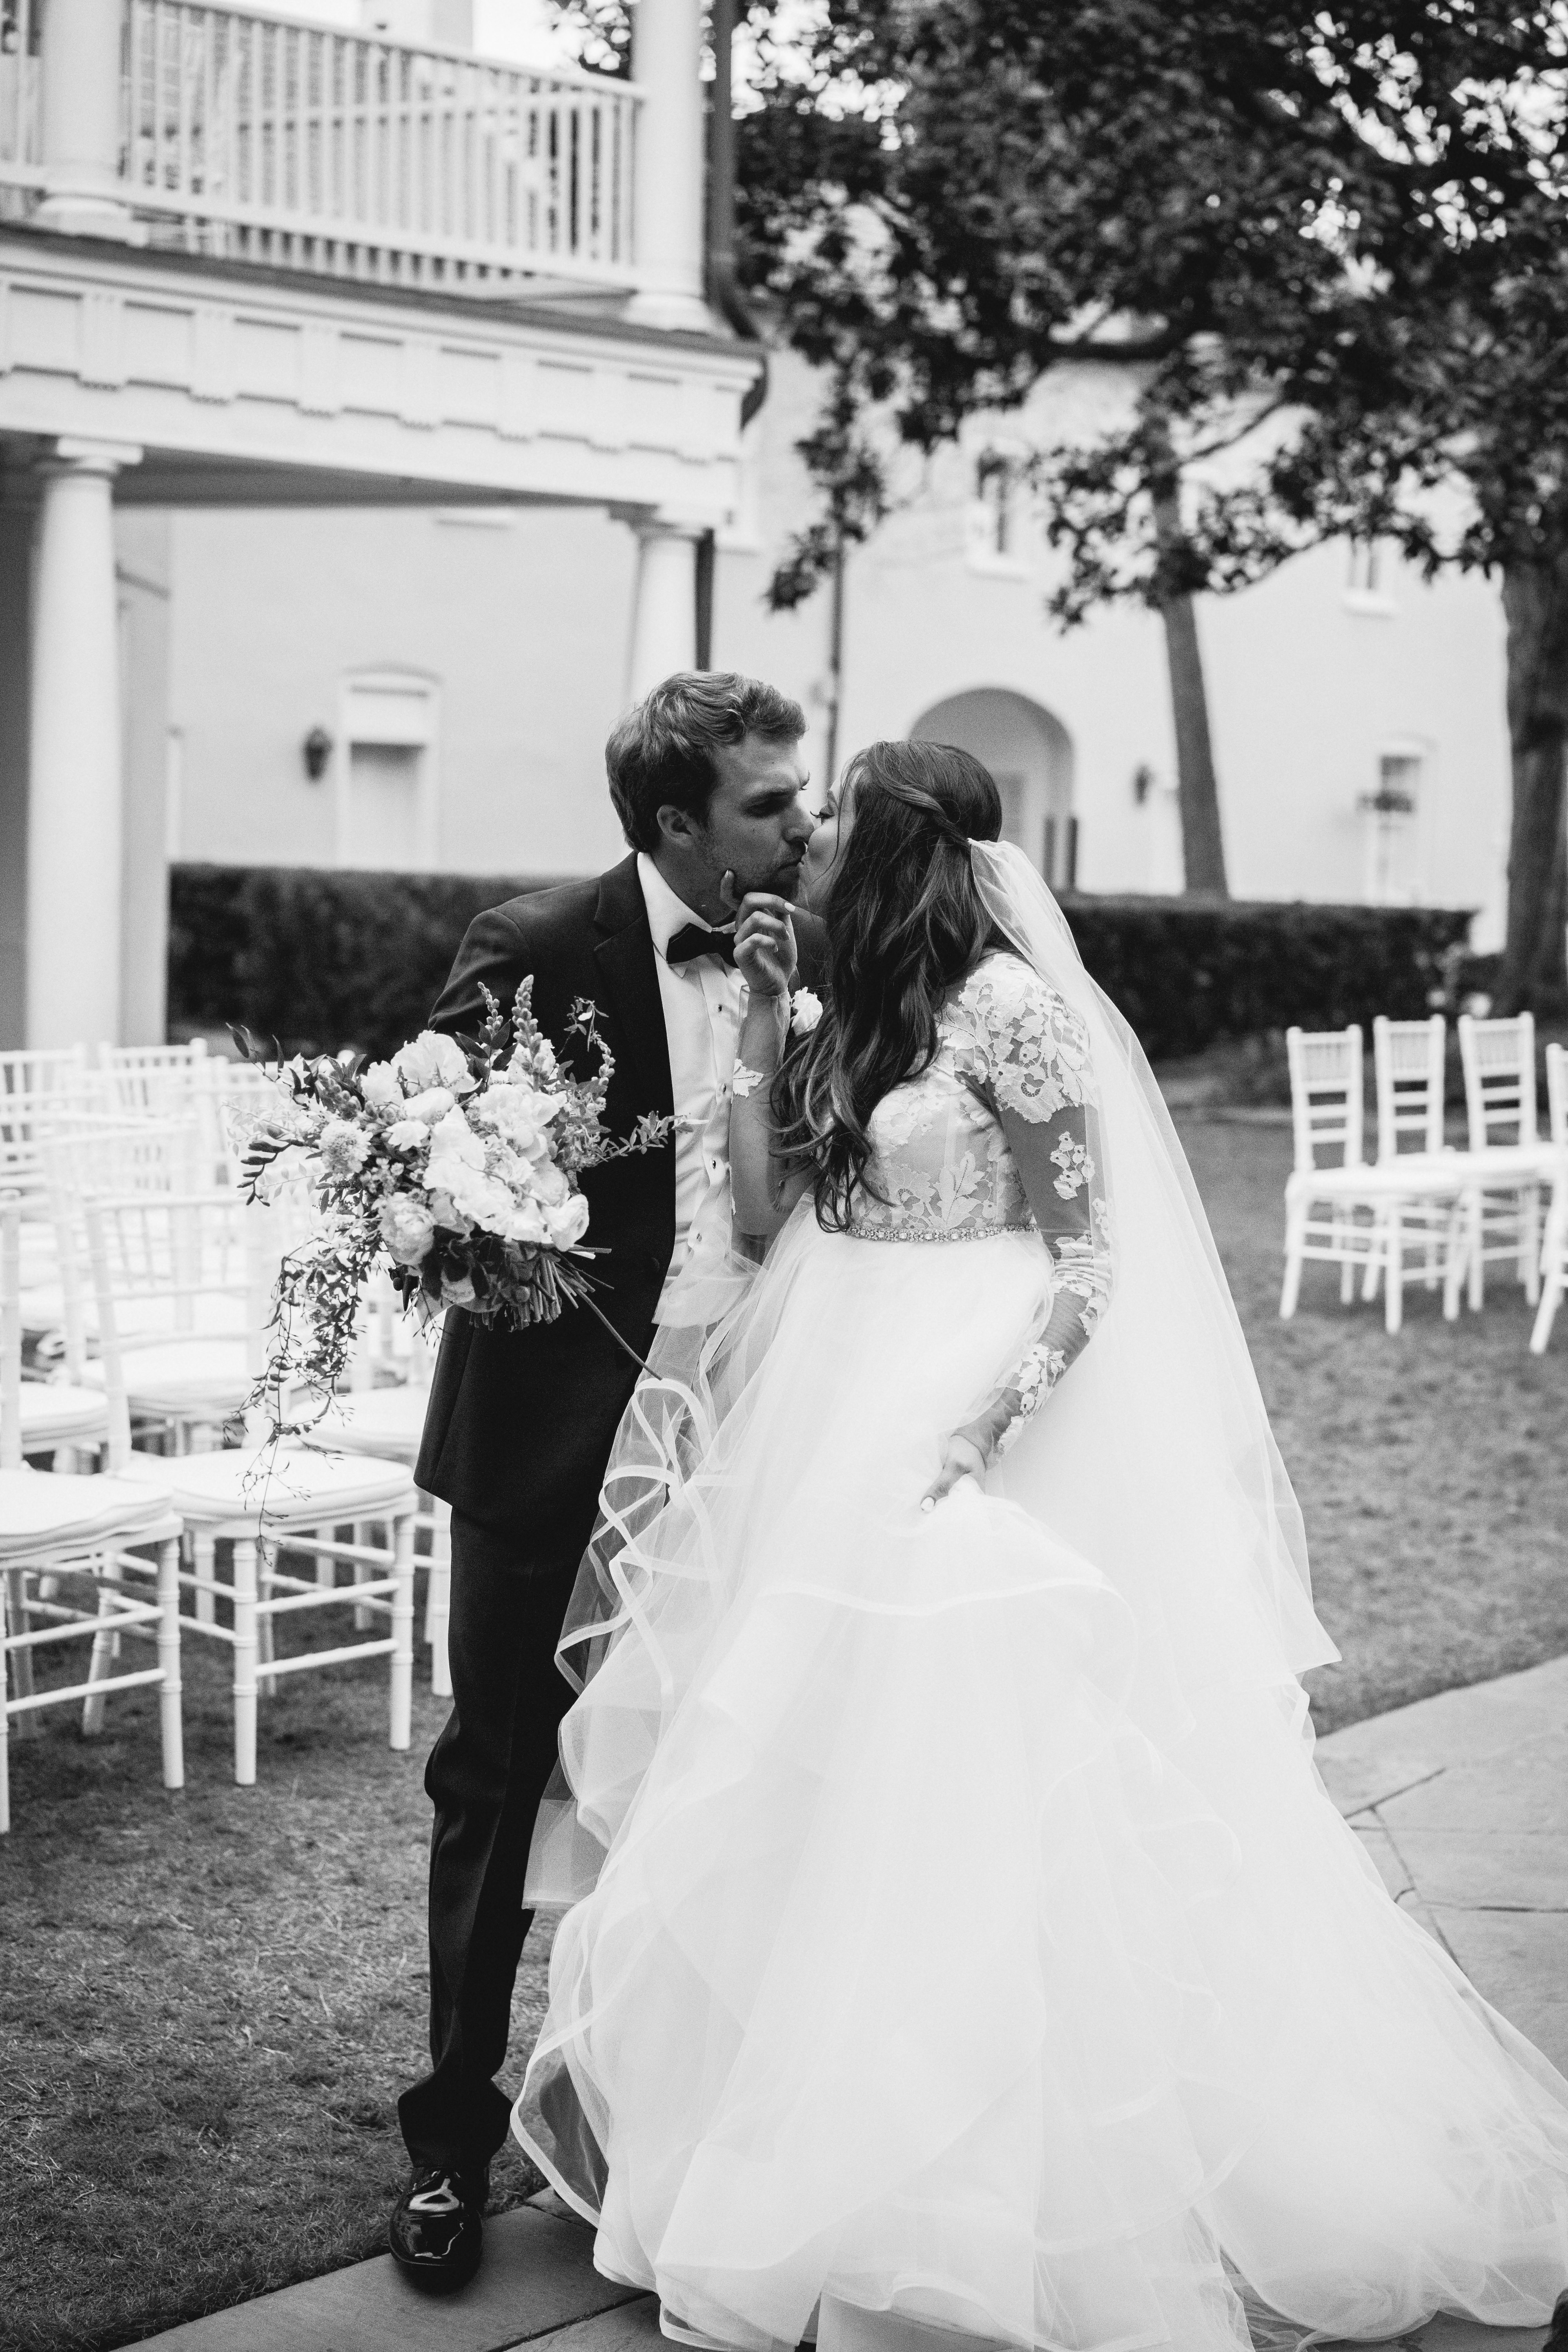 The bride and groom kissing after the ceremony at the William Aiken House Wedding